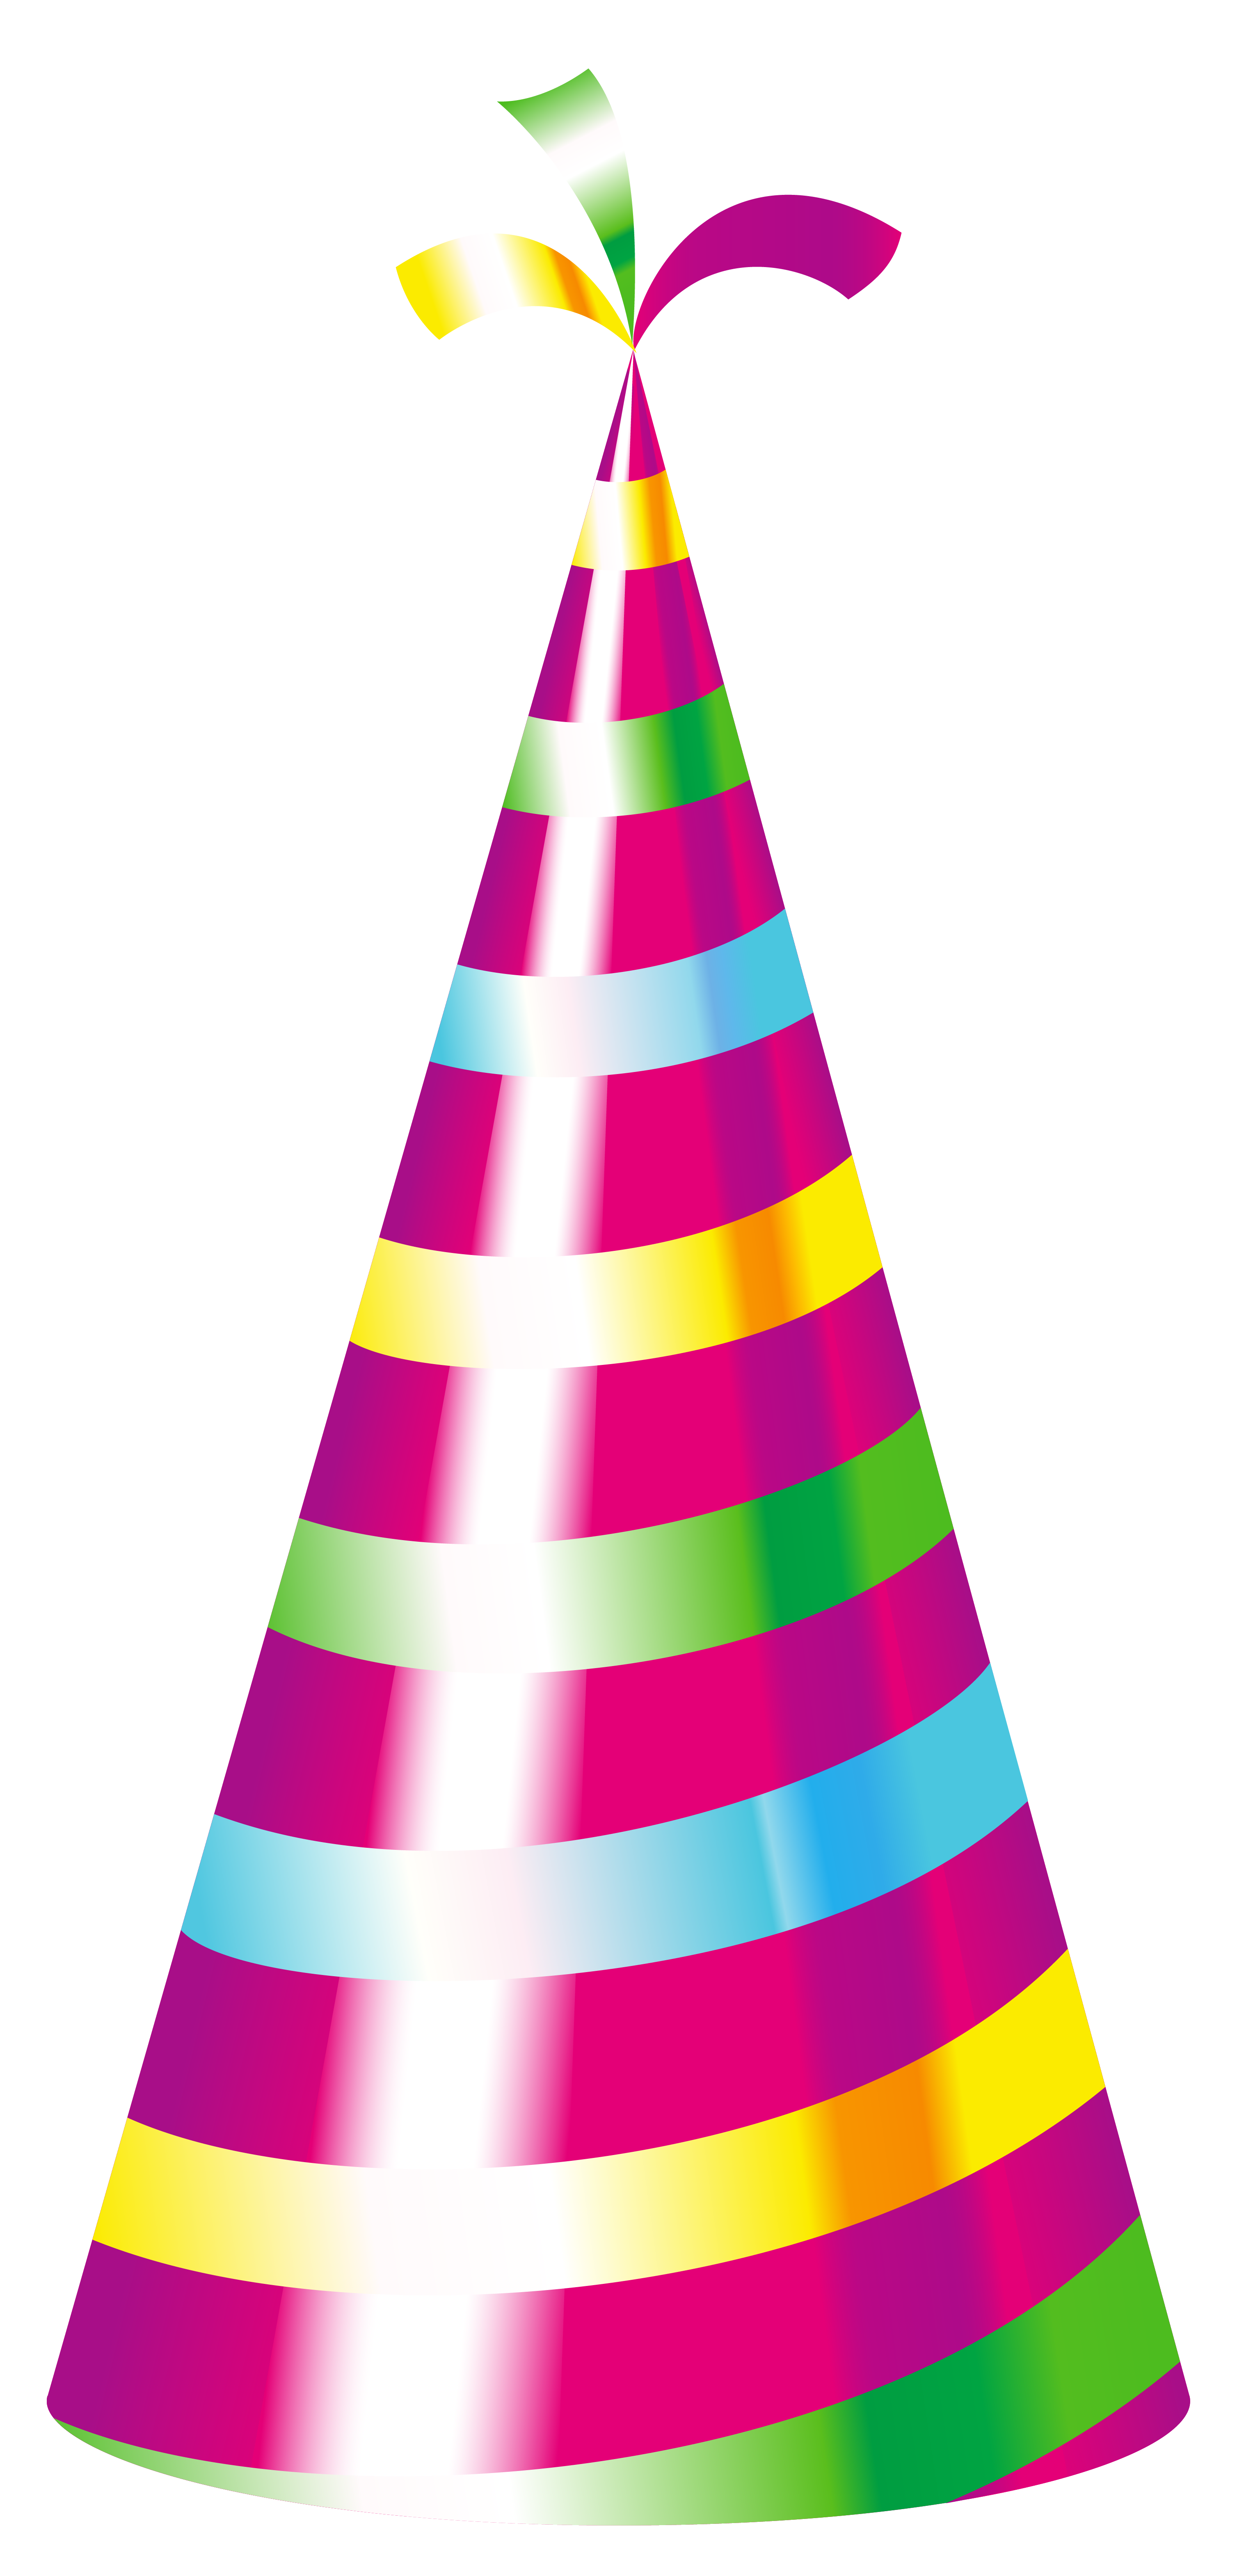 Party hat clipart image gallery yopriceville high quality png